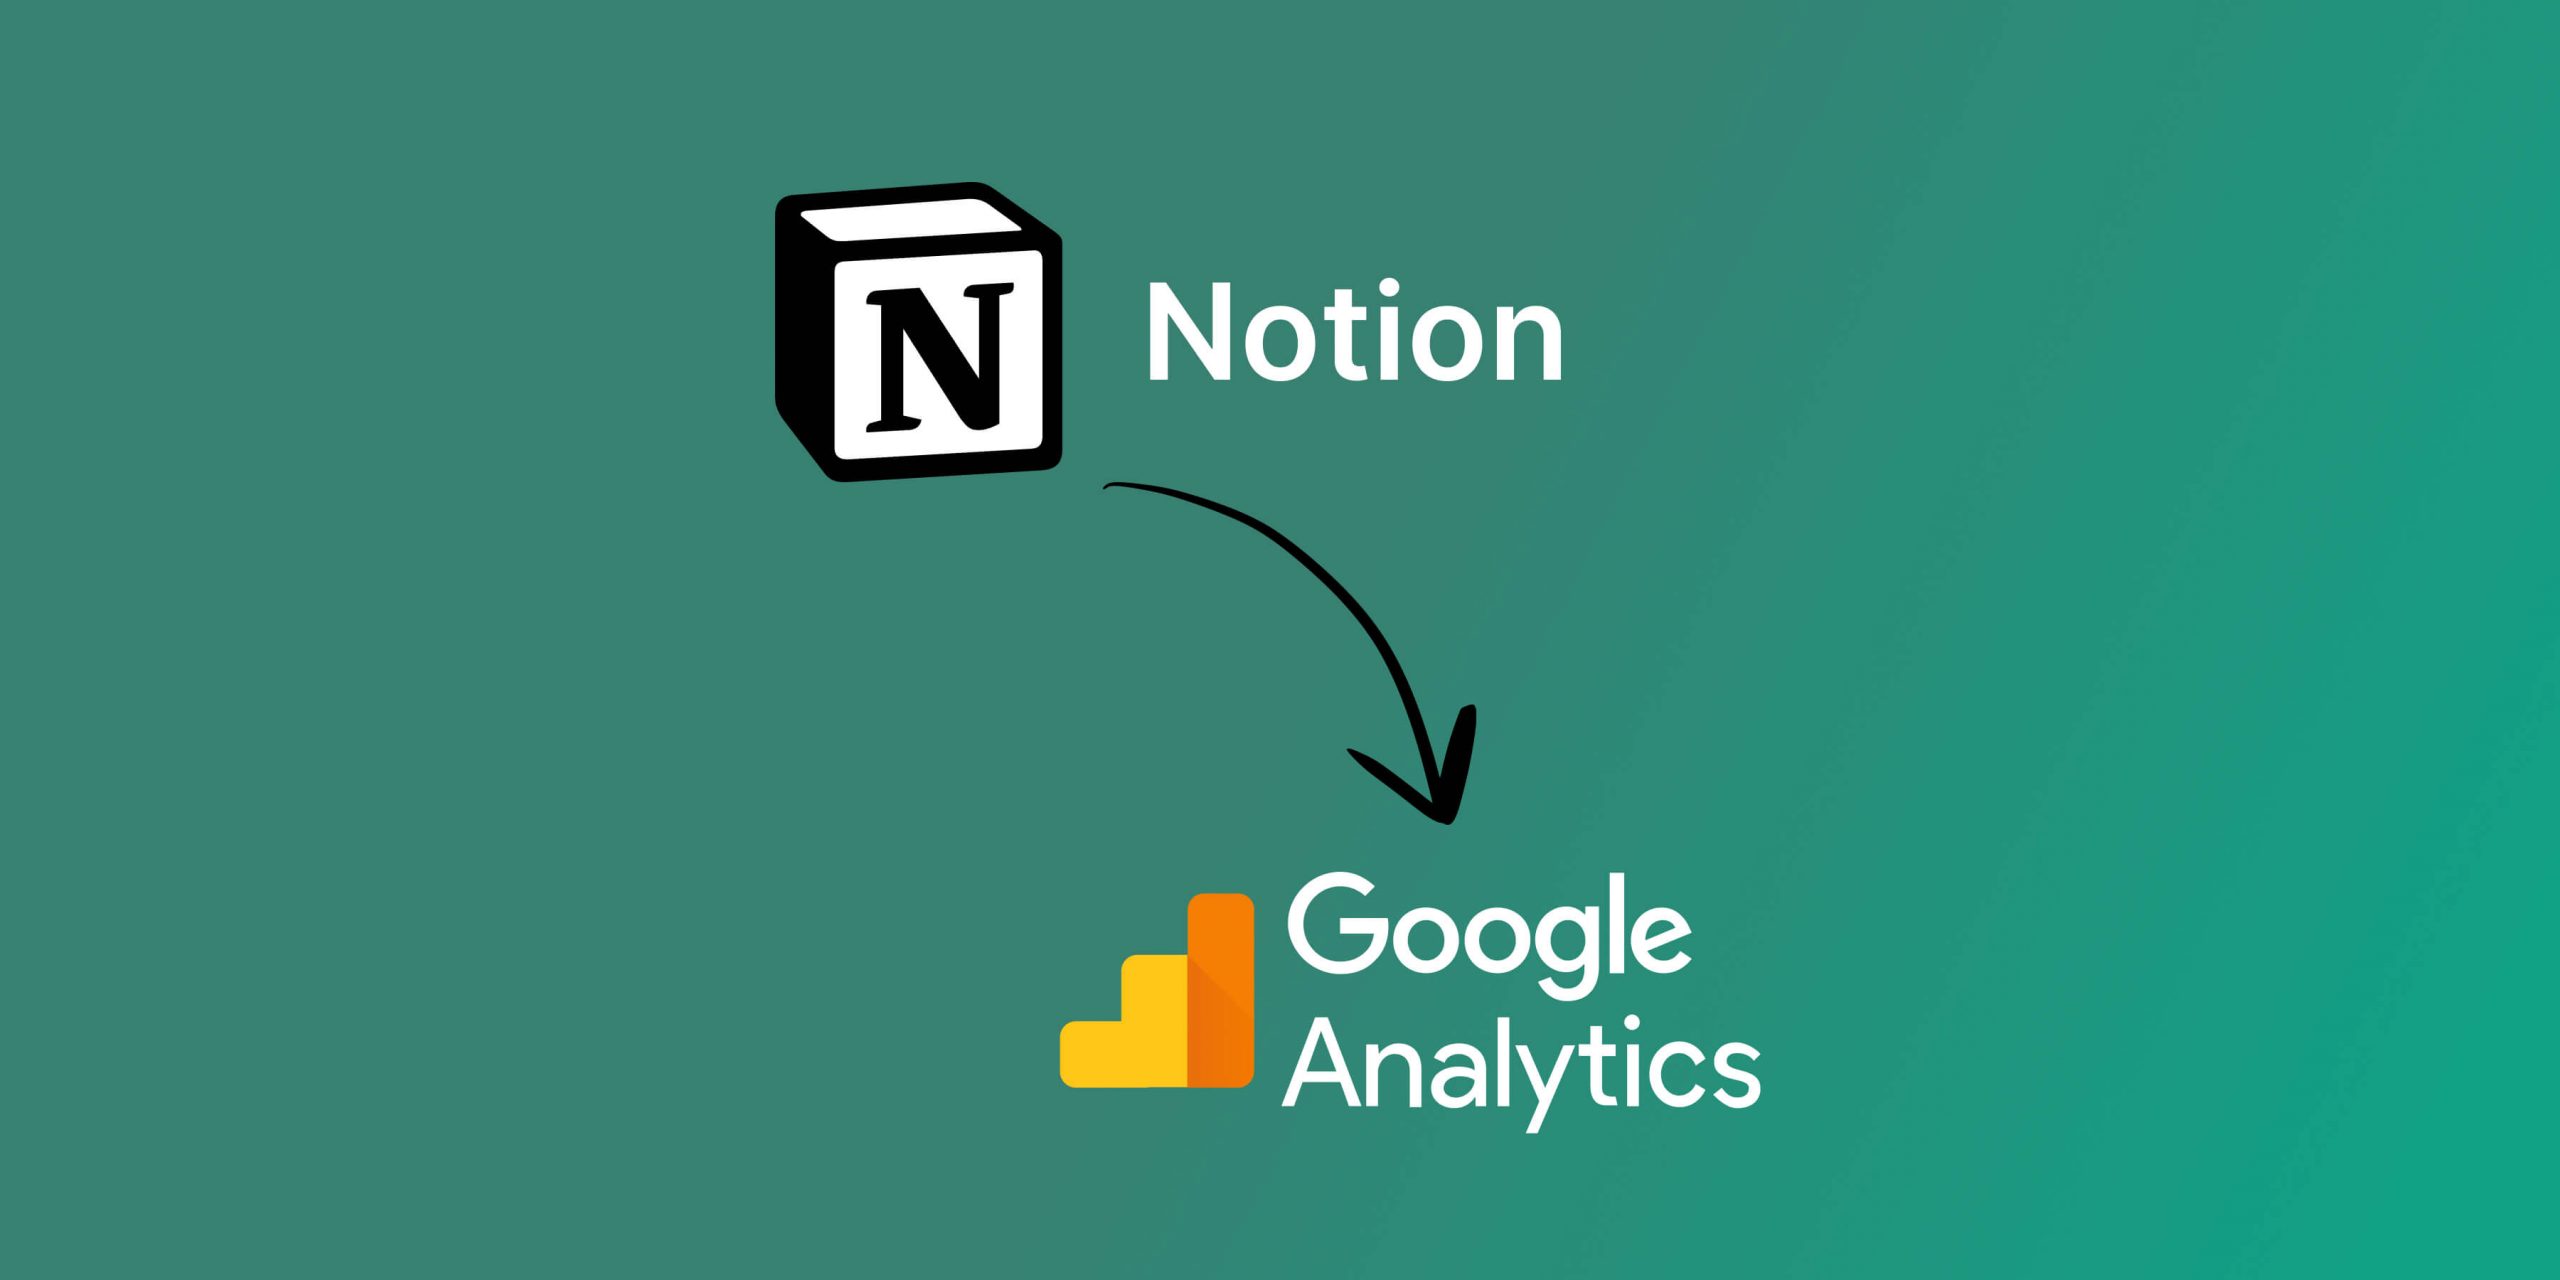 How to add Google Analytics to Notion: Possible or not?